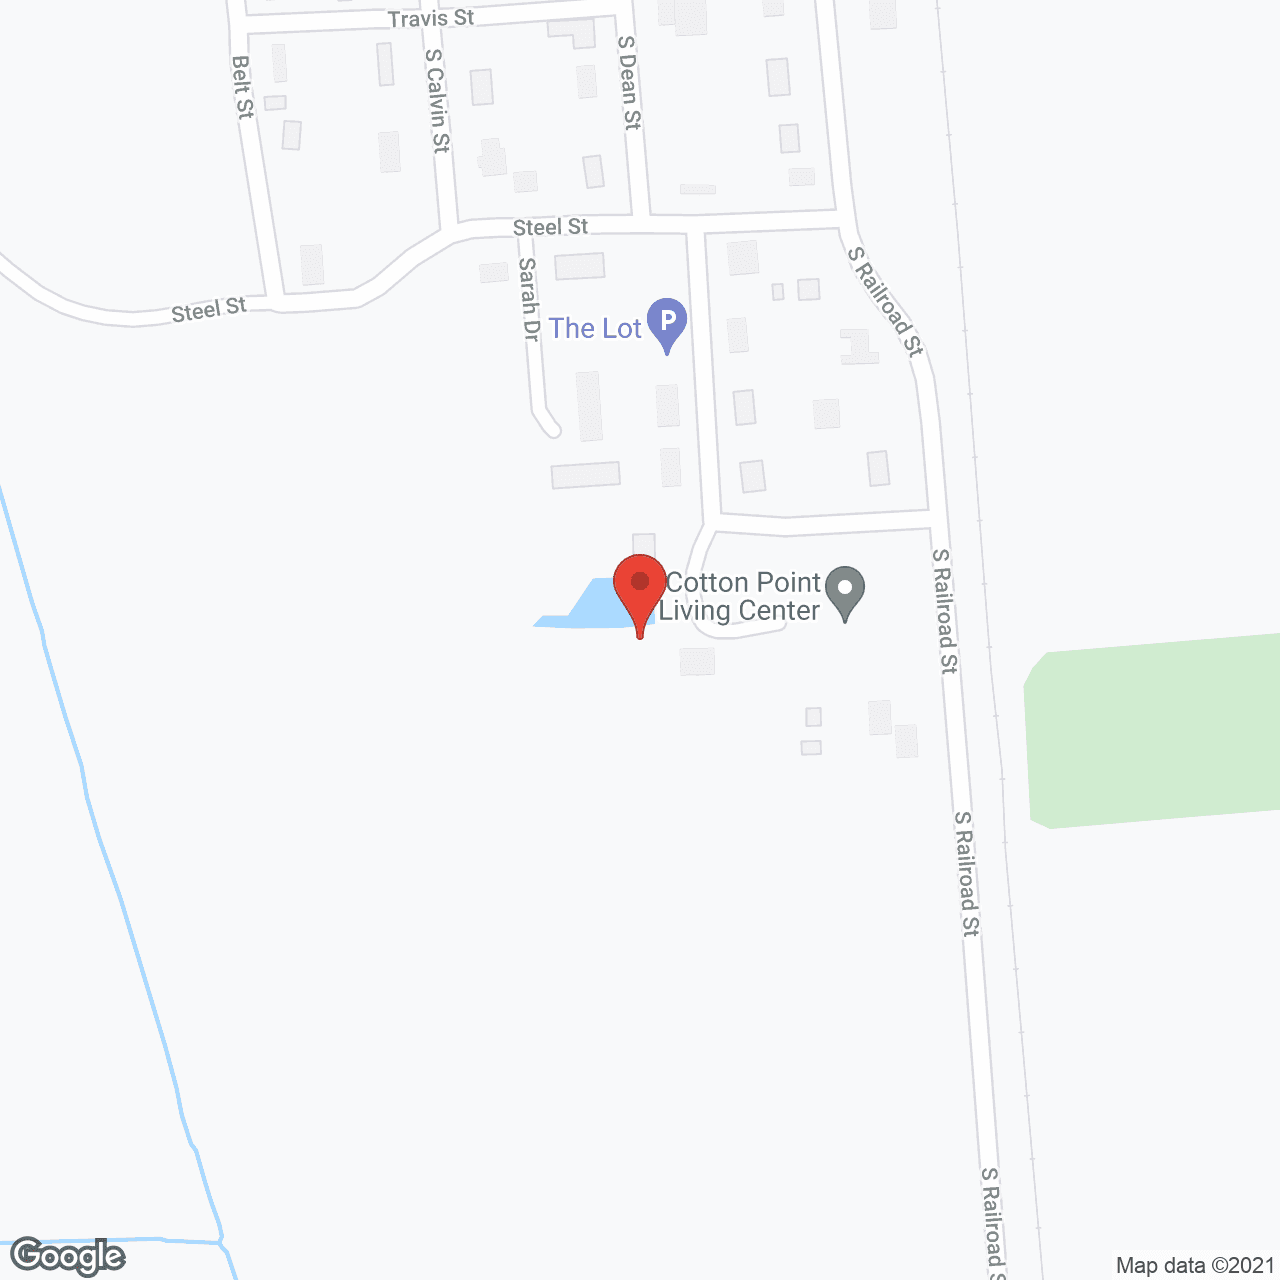 Cotton Point Living Center in google map